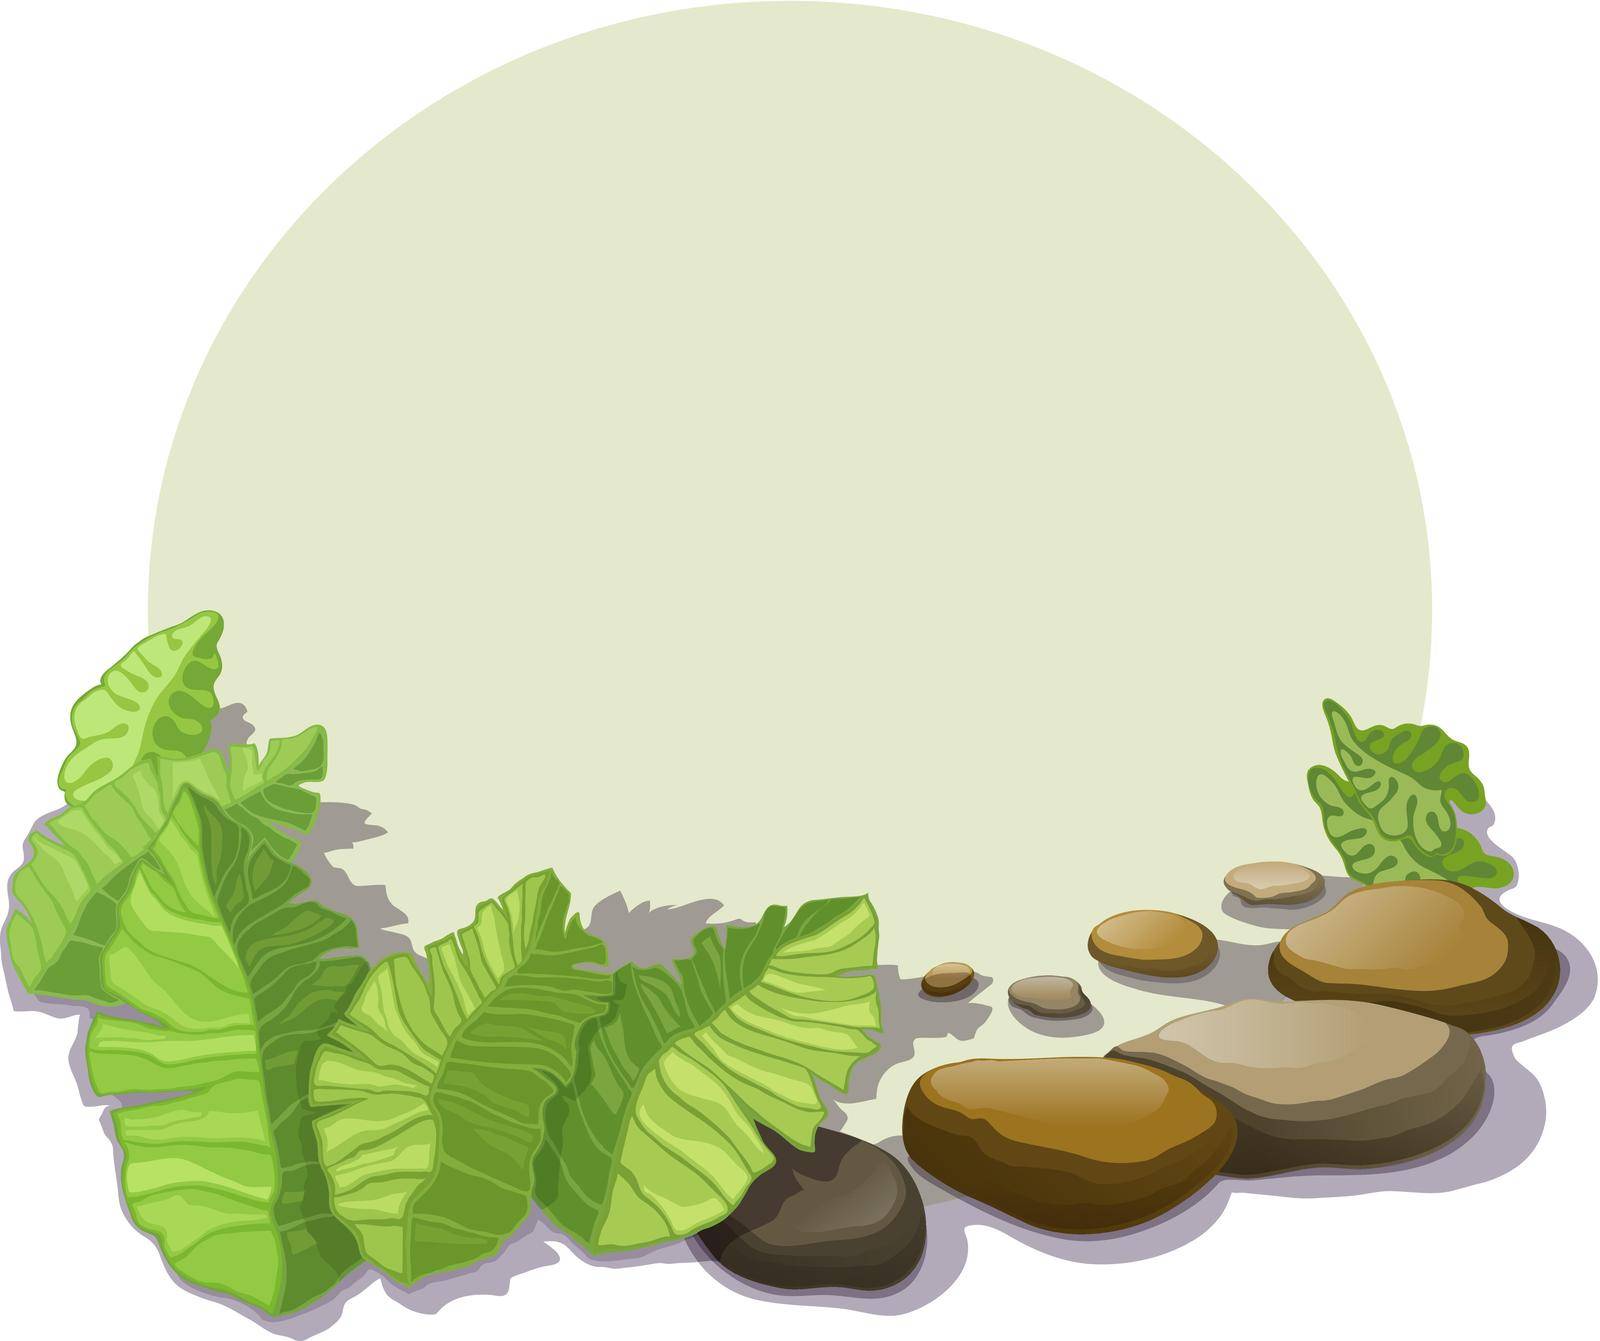 Tropical foliage and stone boulders with shadow, isolated on a circle background.